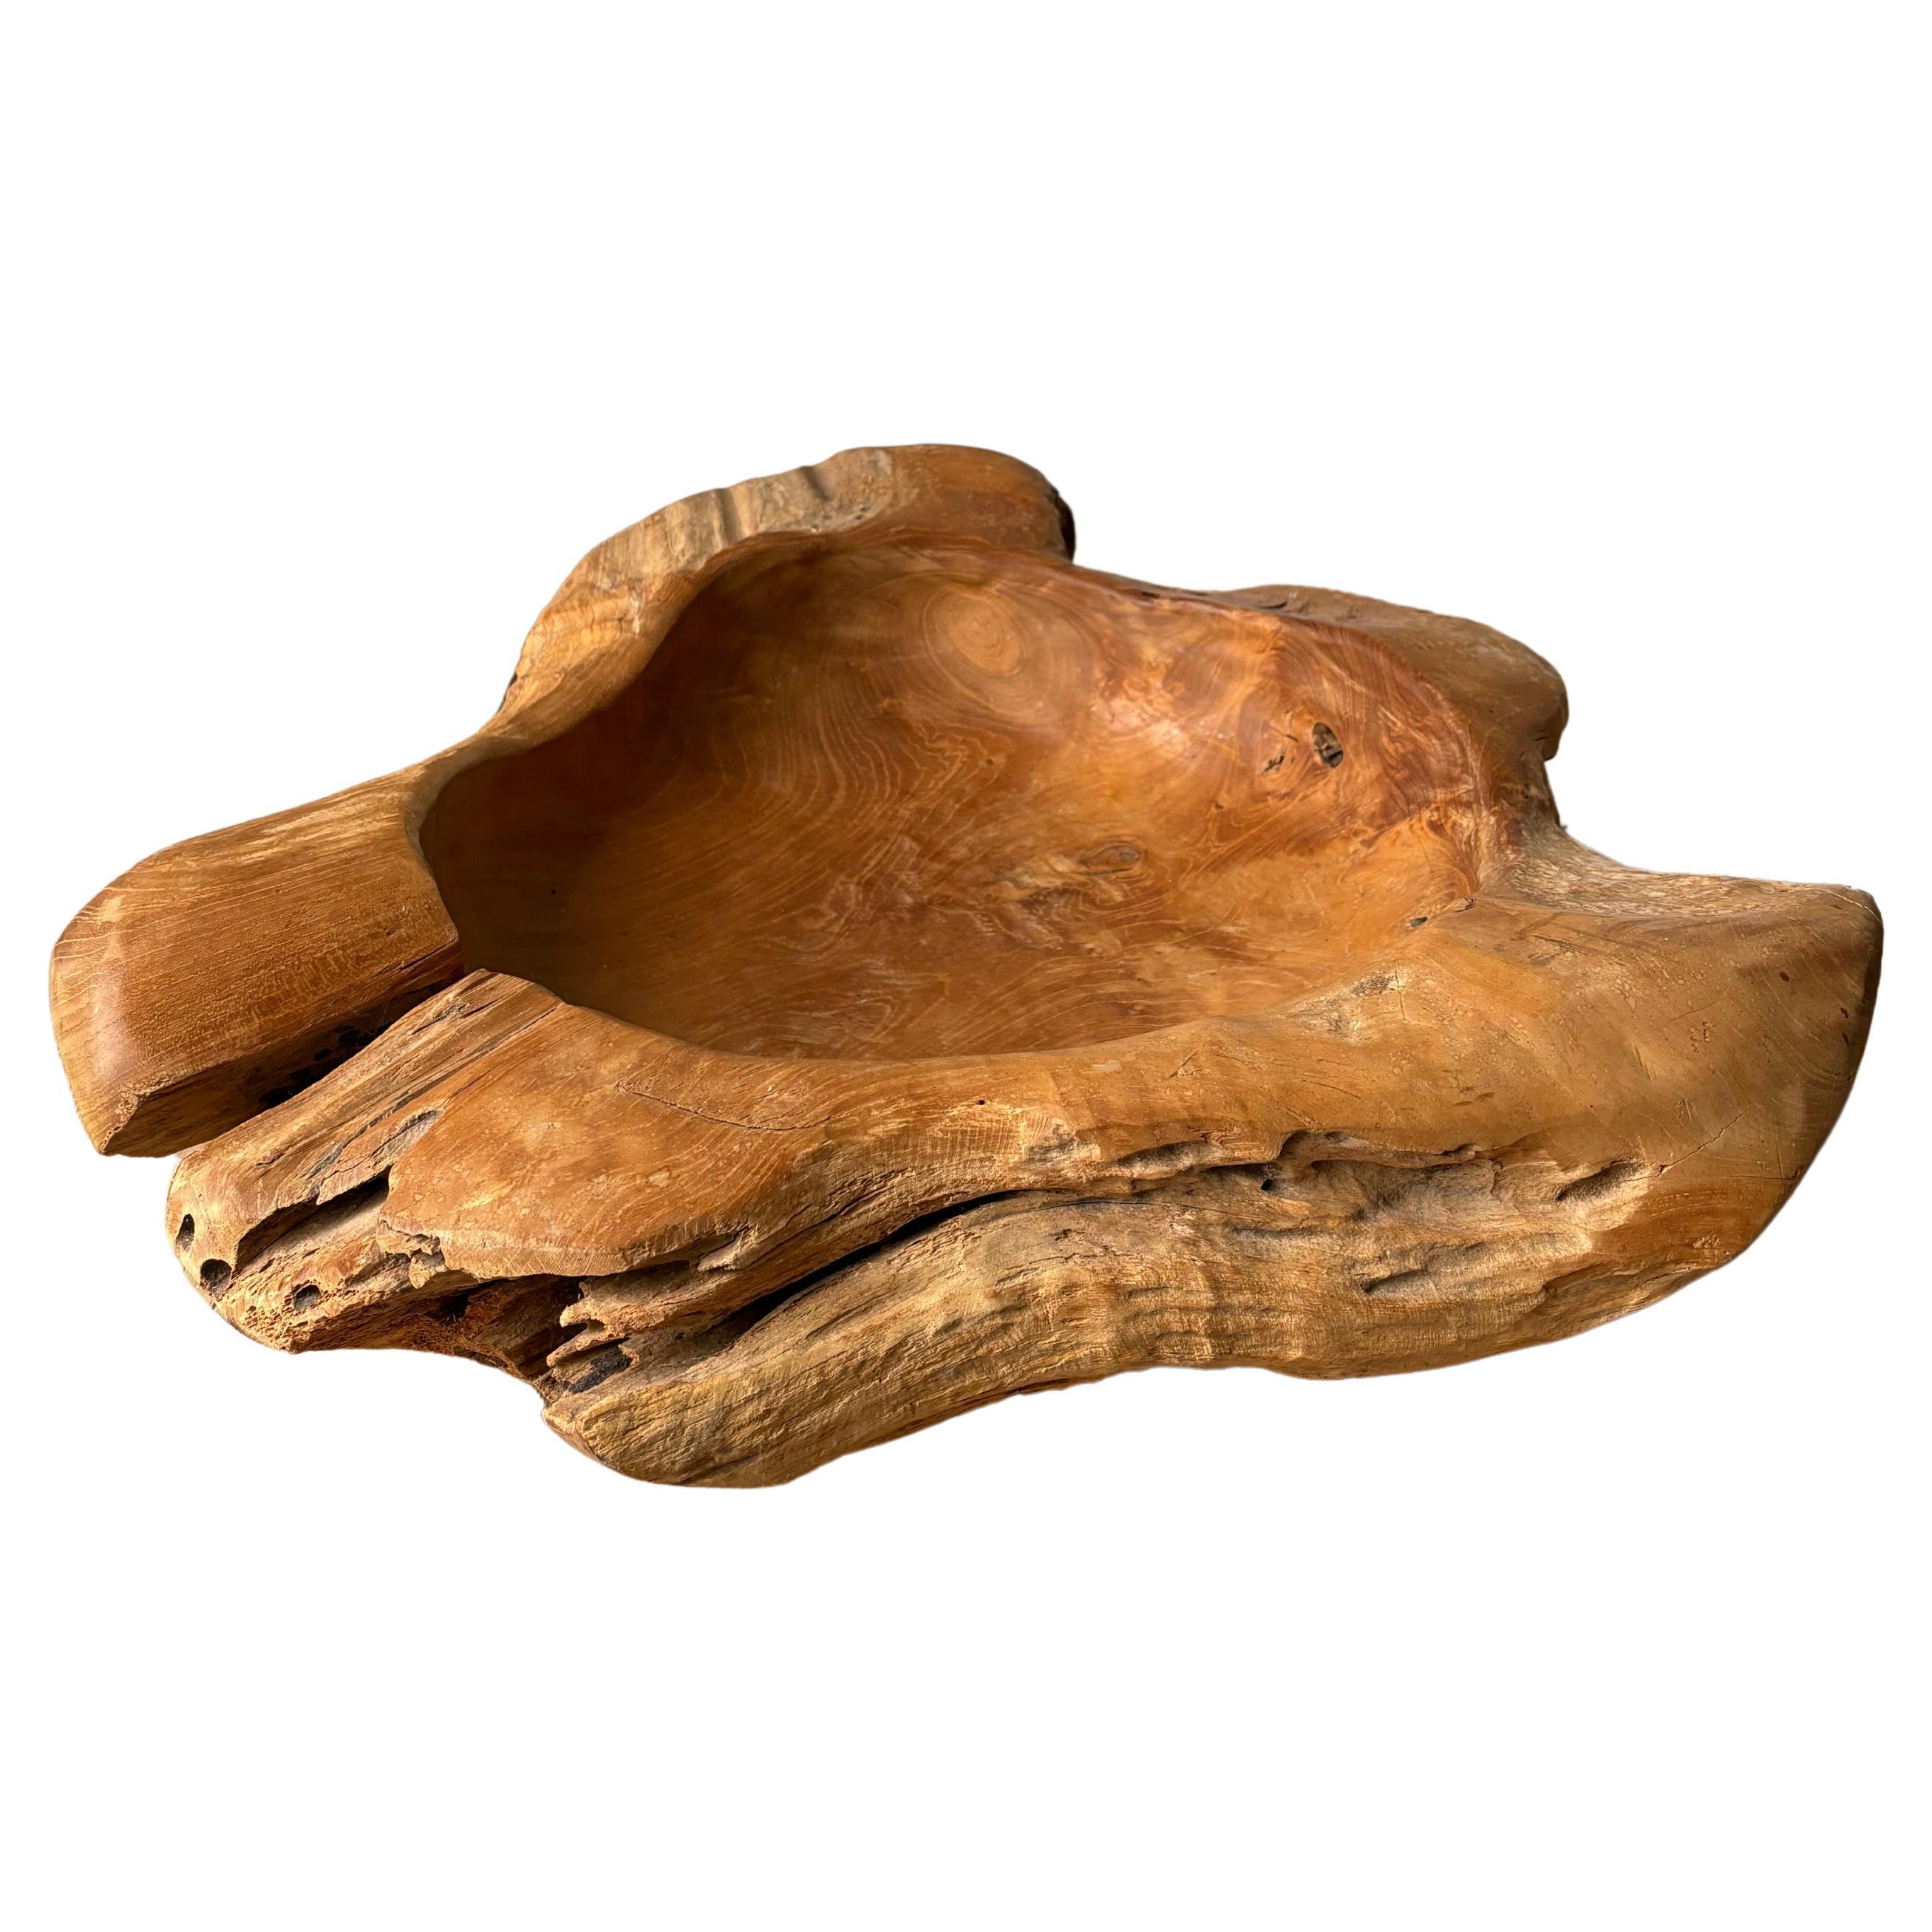 X-Large Vintage French Olive Wood Bowl, Early 20th Century